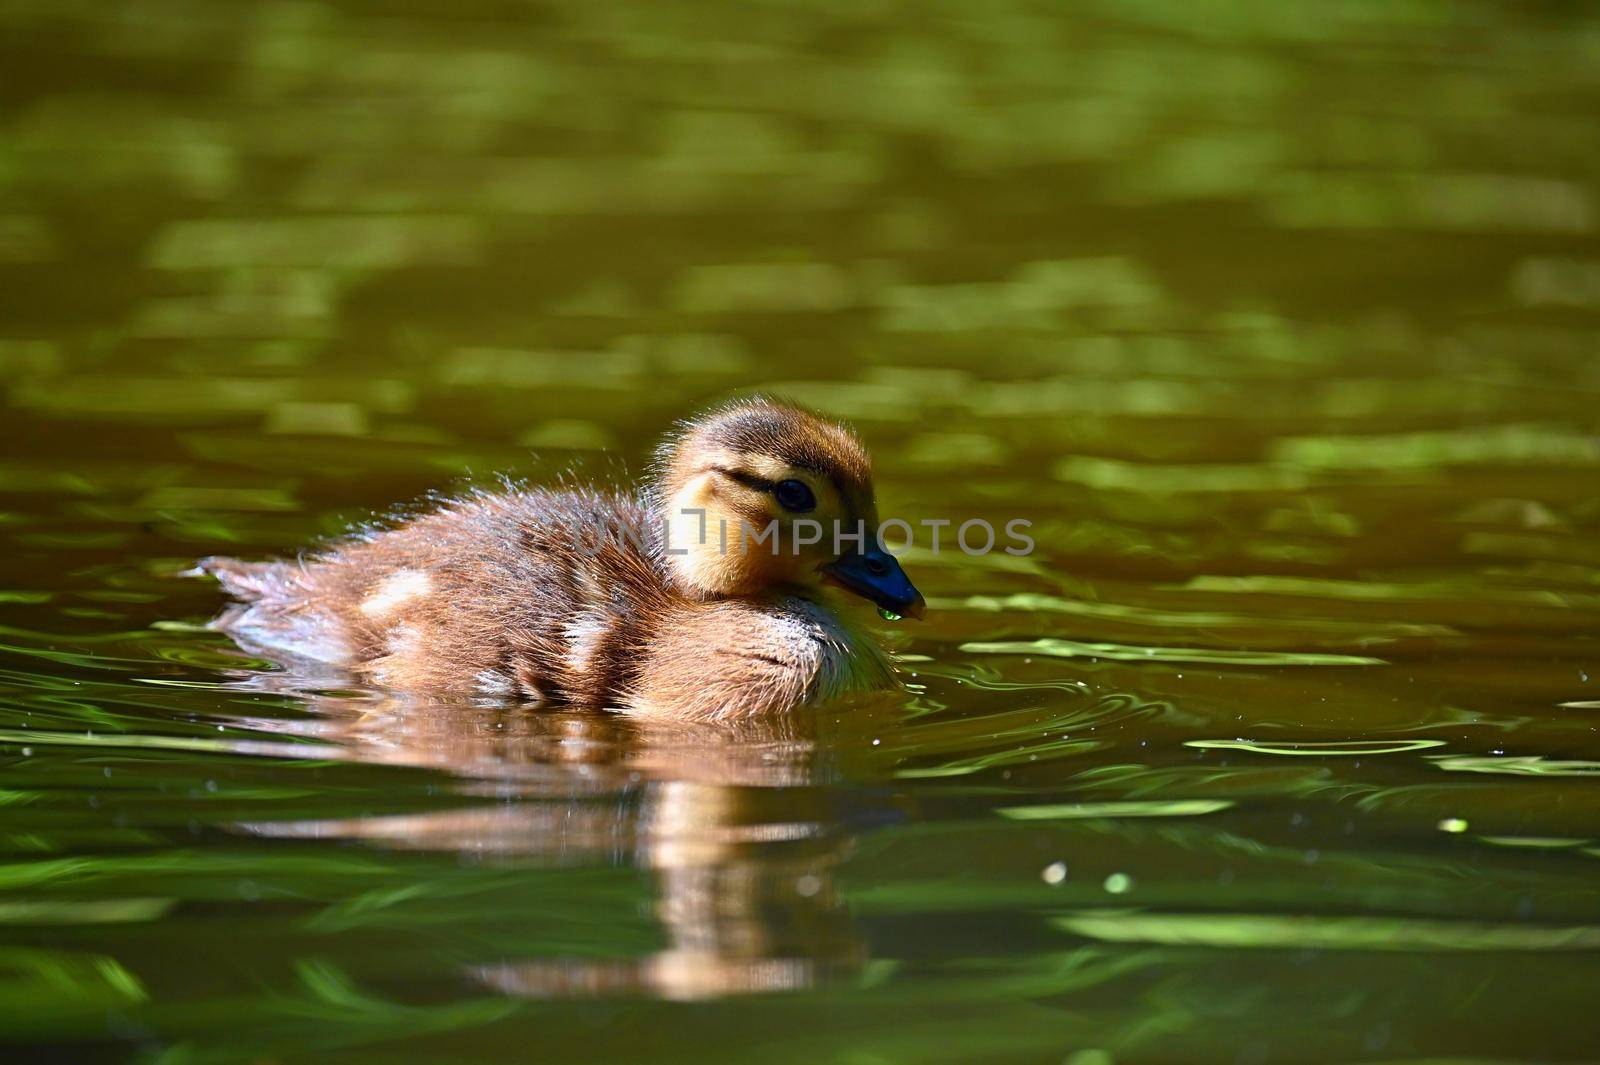 Duckling. Mandarin duckling cub. Beautiful young water bird in the wild. Colorful background. by Montypeter